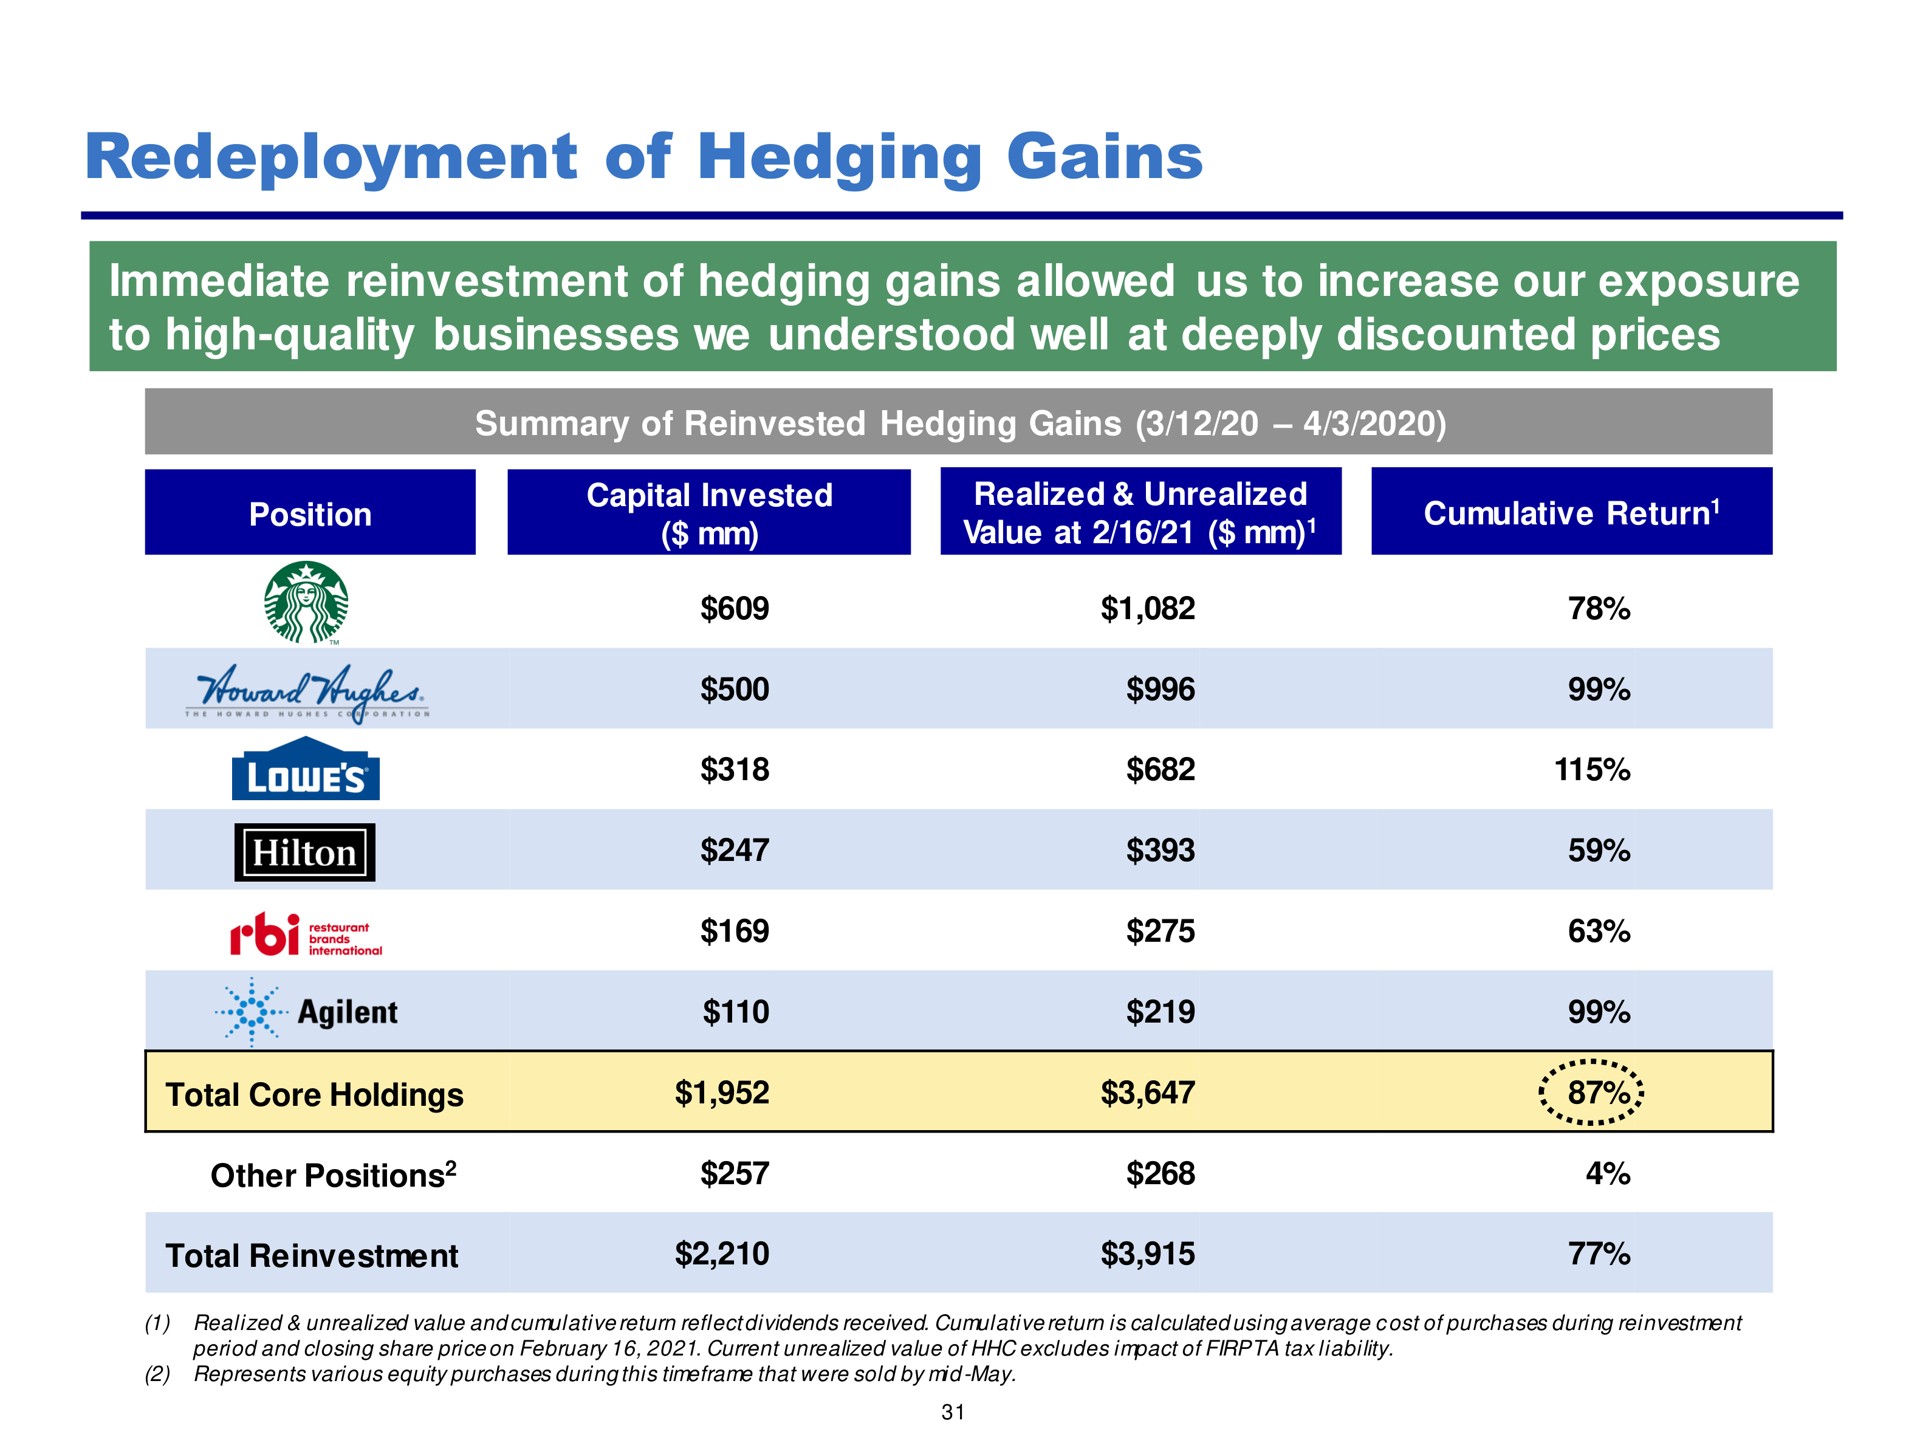 redeployment of hedging gains | Pershing Square